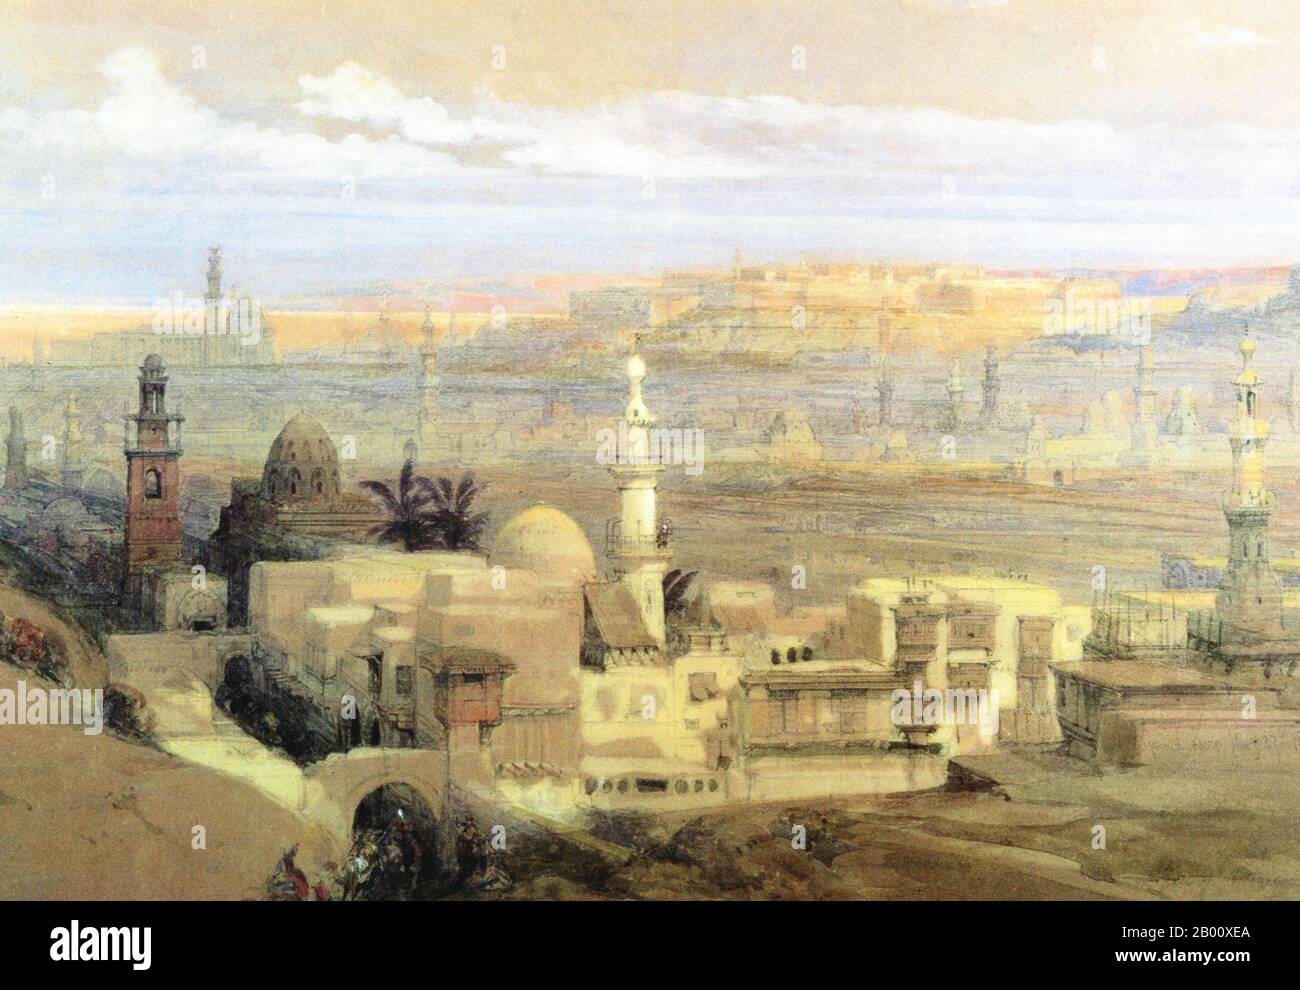 Egypt: ‘Cairo from the Gate of Citizenib, looking towards the Desert of Suez'. Watercolour painting by David Roberts (1796-1864), c. 1839-1840.  David Roberts (1796-1864) was a Scottish painter renowned for a prolific series of detailed lithograph prints and paintings of Egypt and the Middle East that he produced during long tours of the region. He was elected as a Royal Academician in 1841. Stock Photo